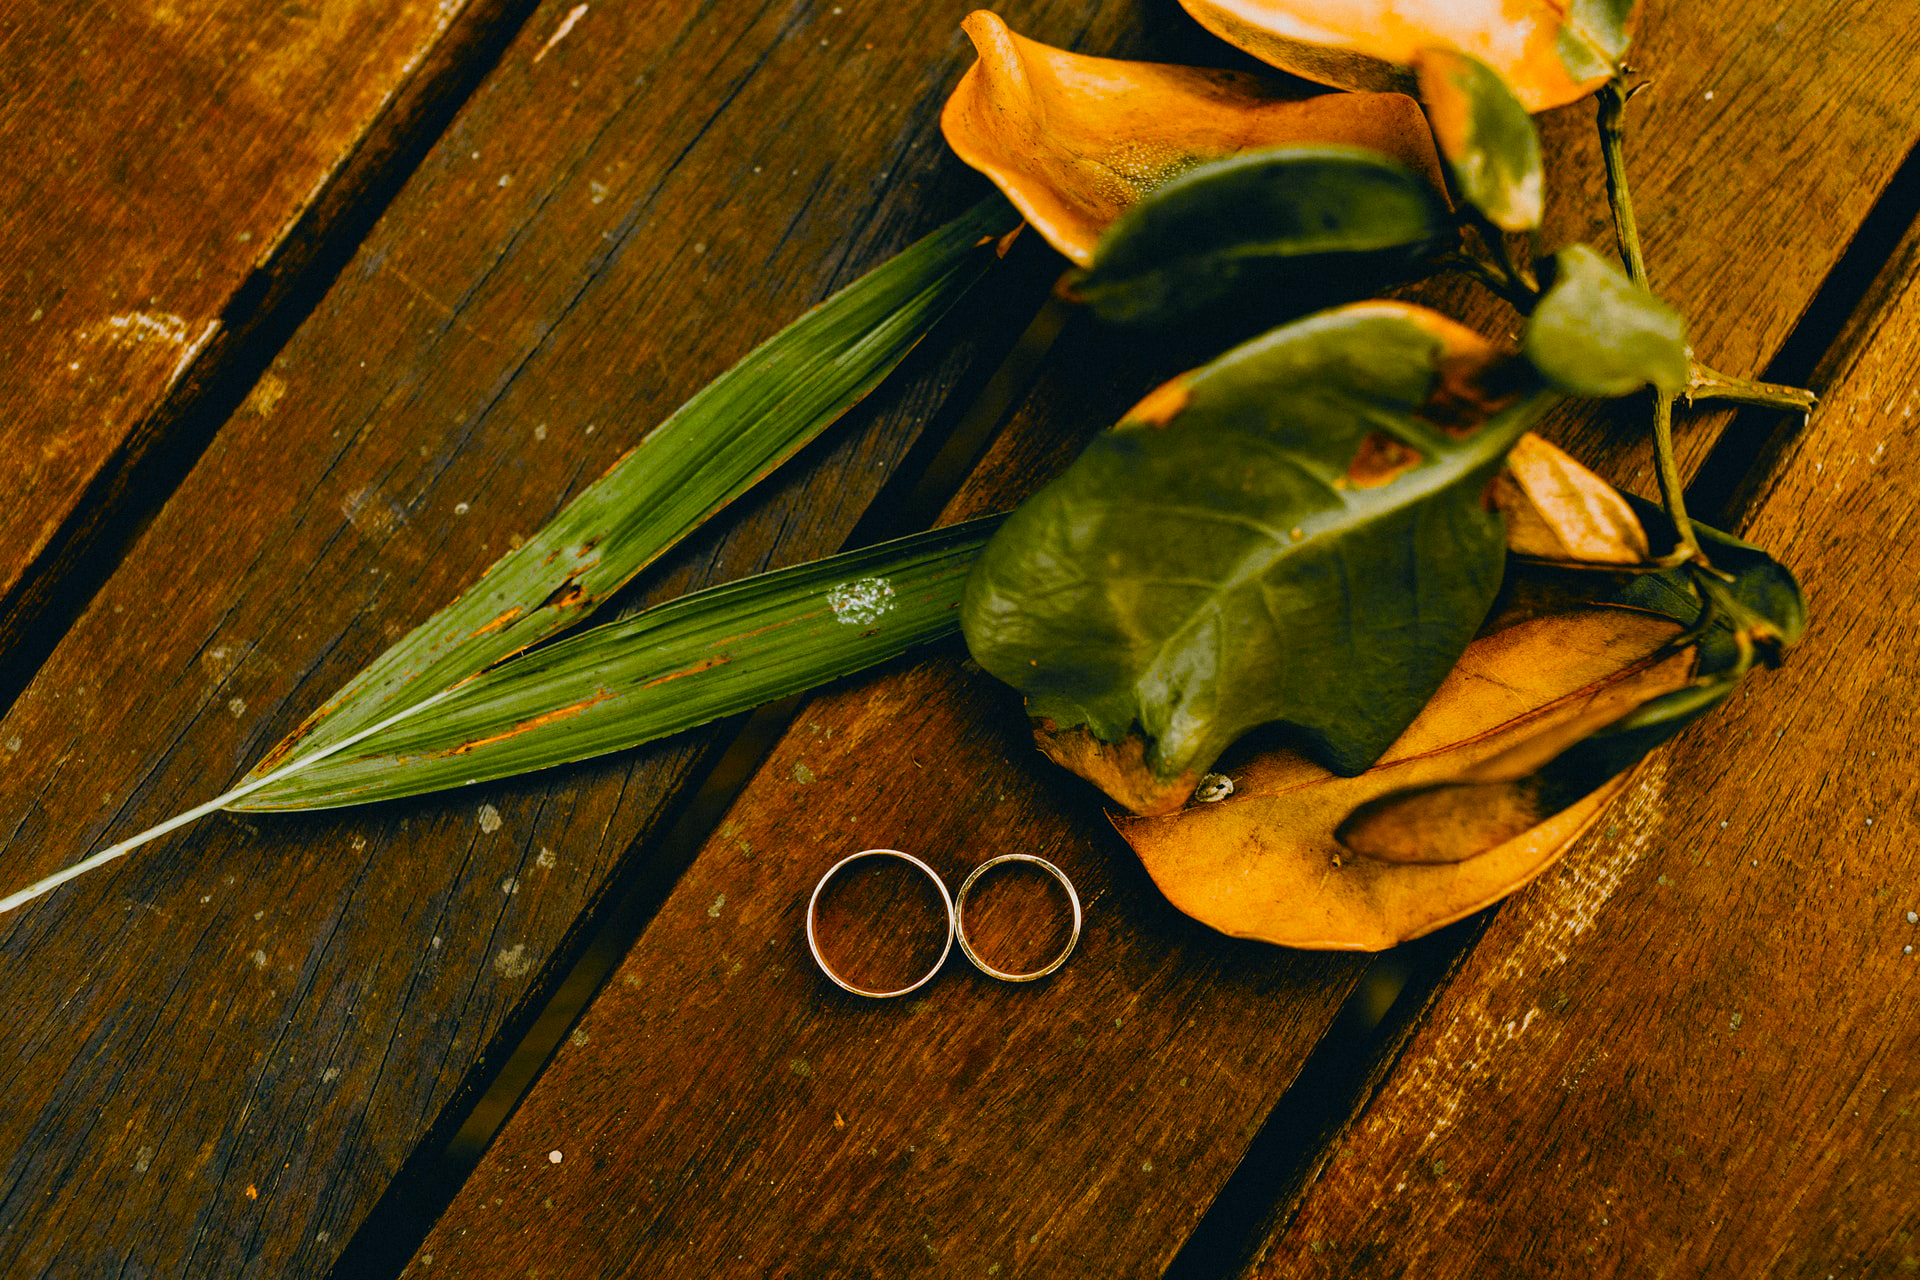 Engagement bands with leaves